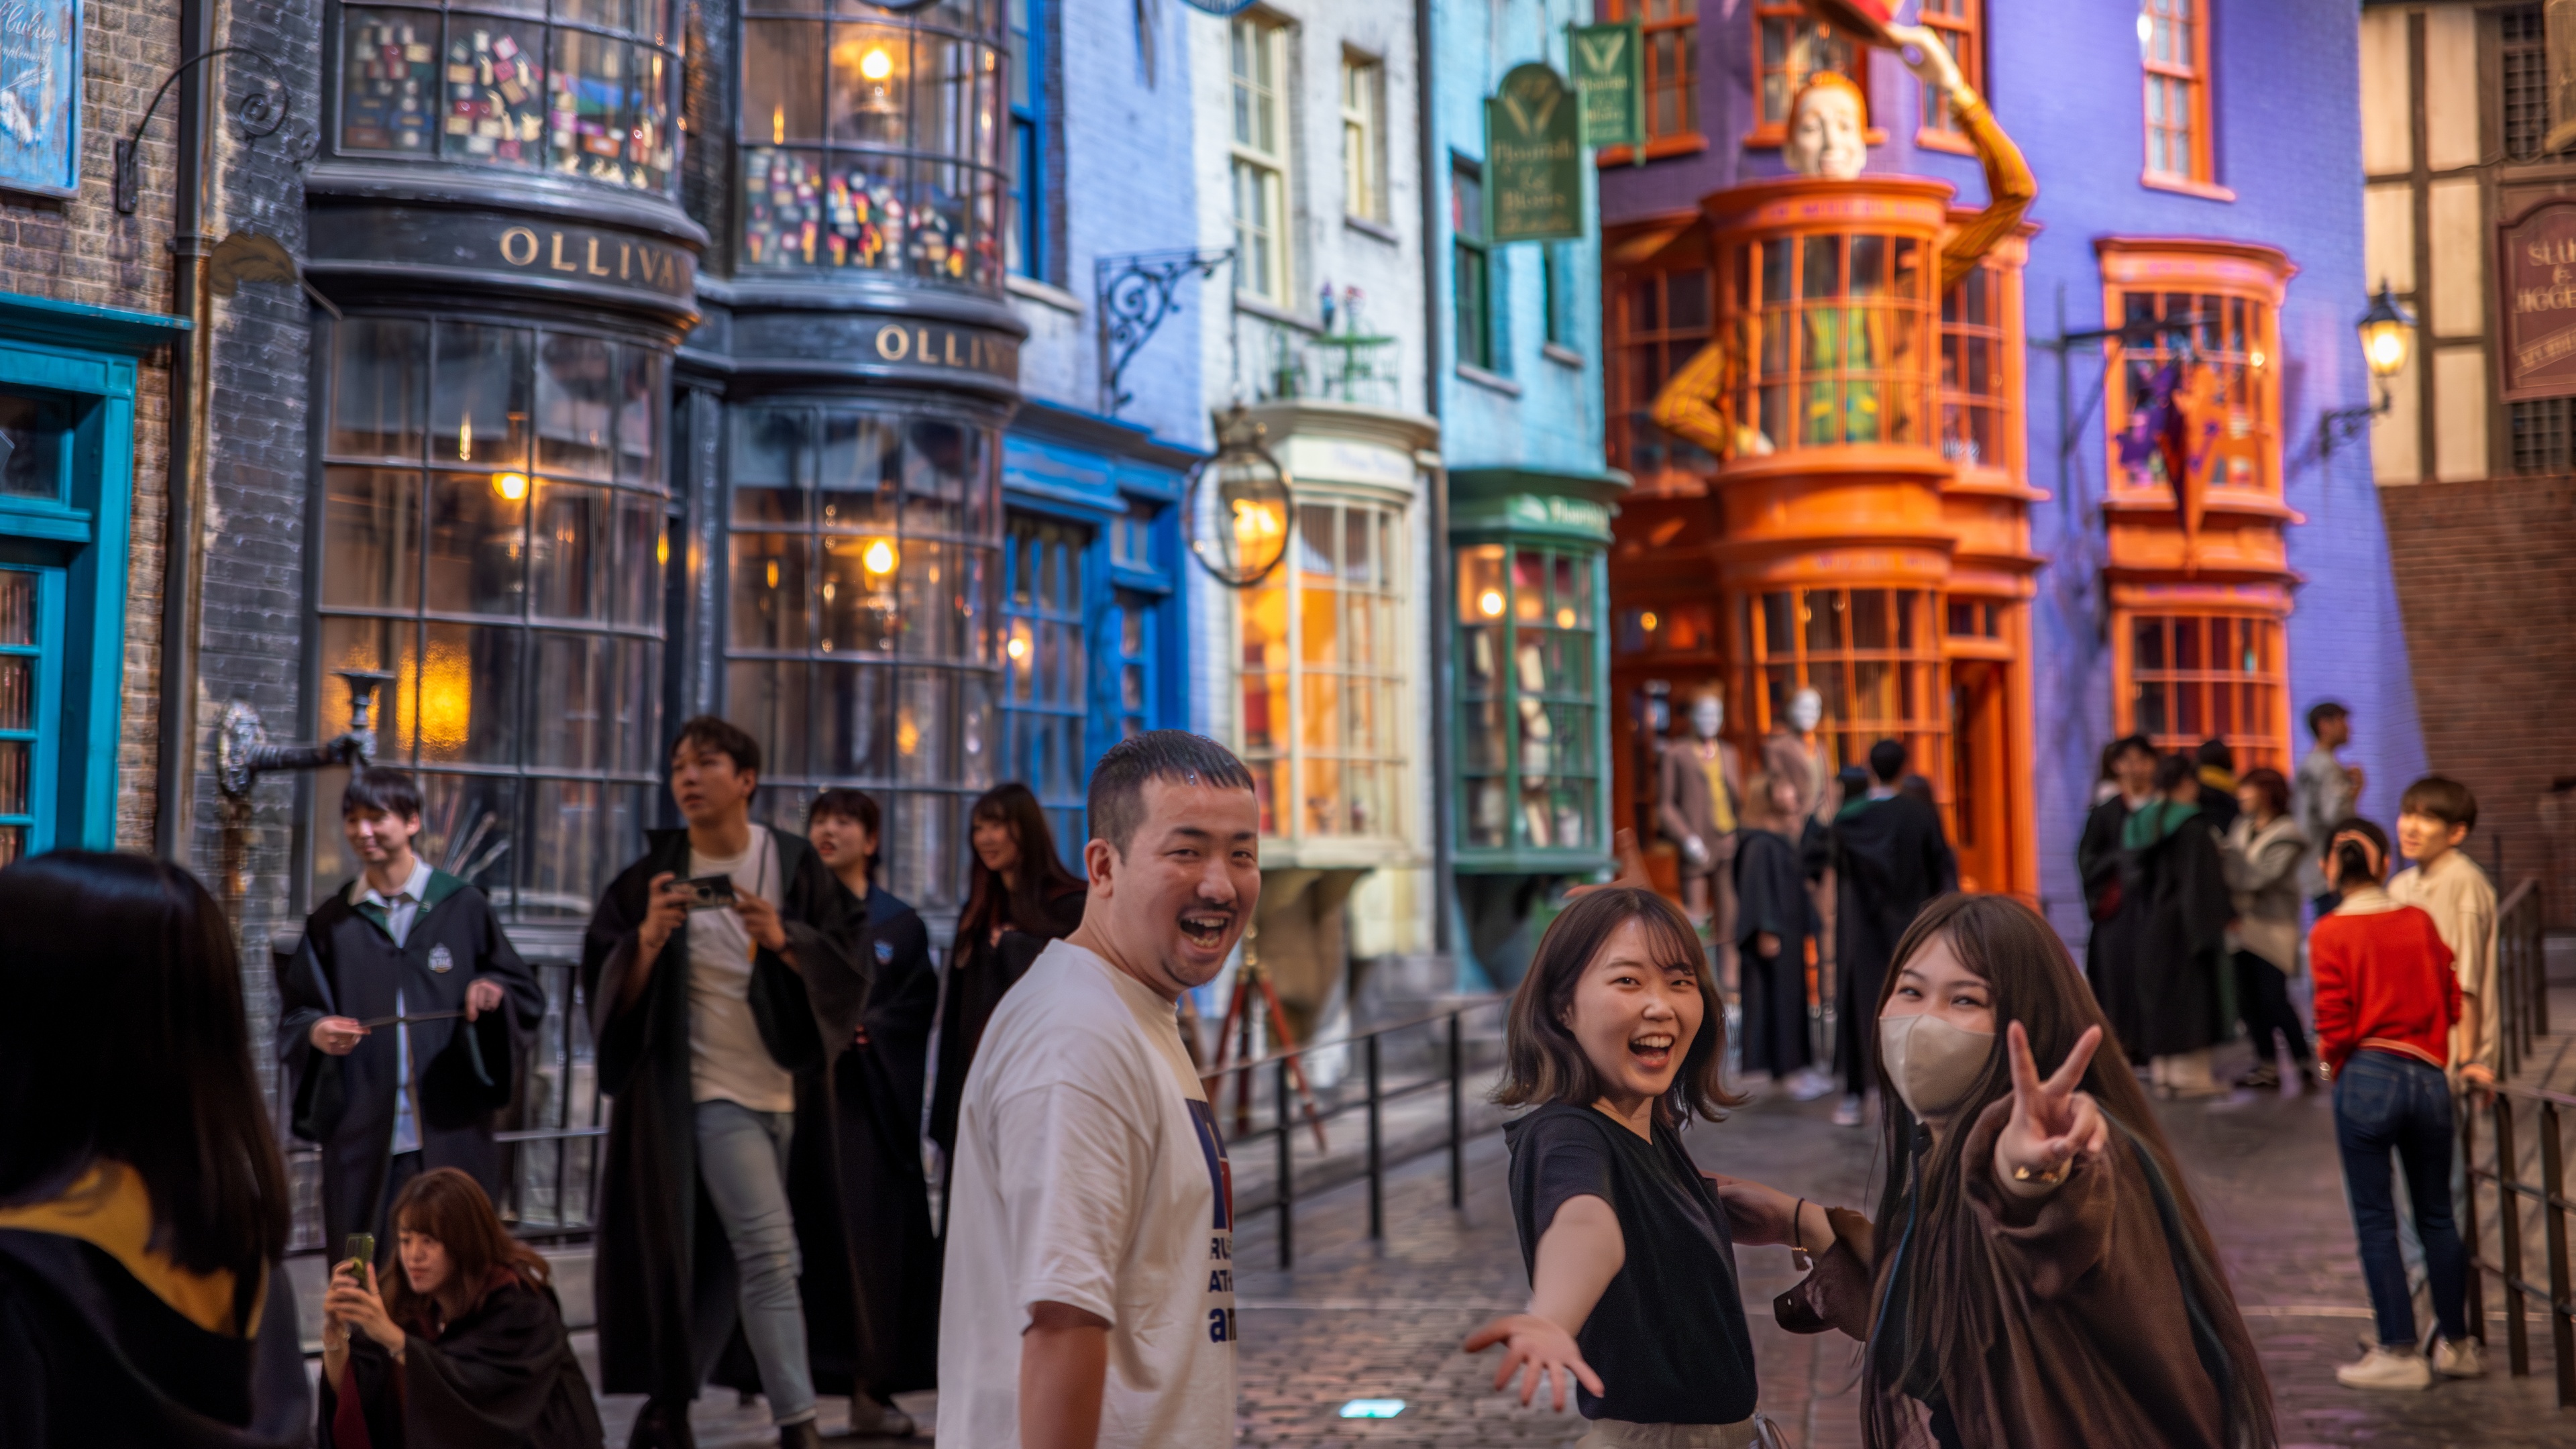 People looking back laughing walking down Diagon Alley showing the peace sign with a crowd in the background